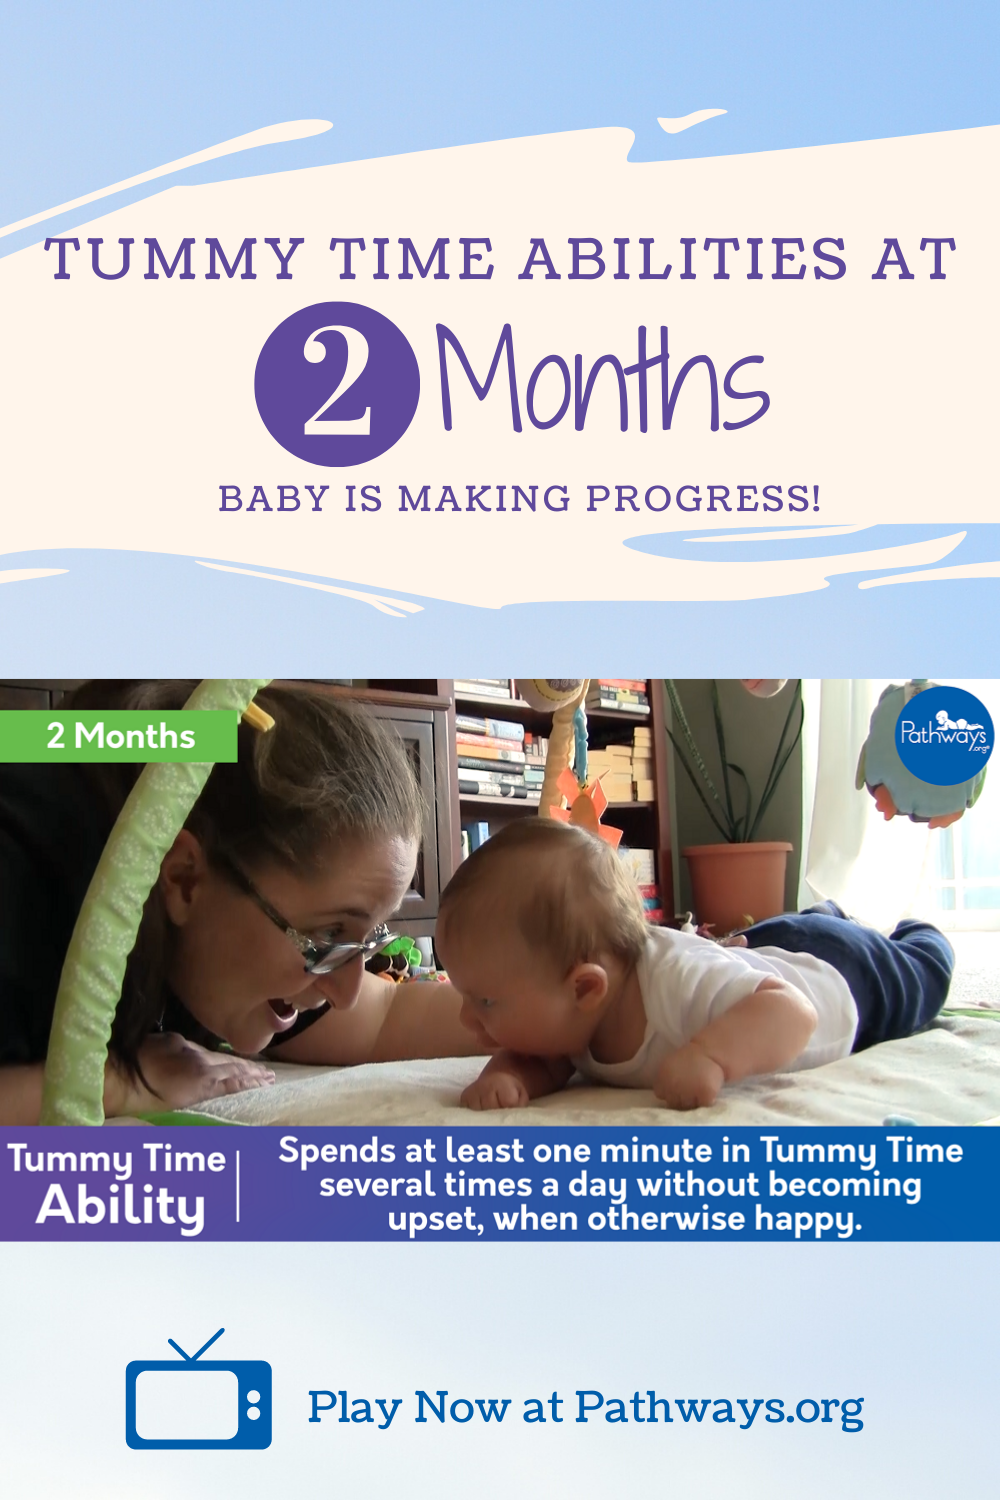 Tummy Time Abilities at 2 Months